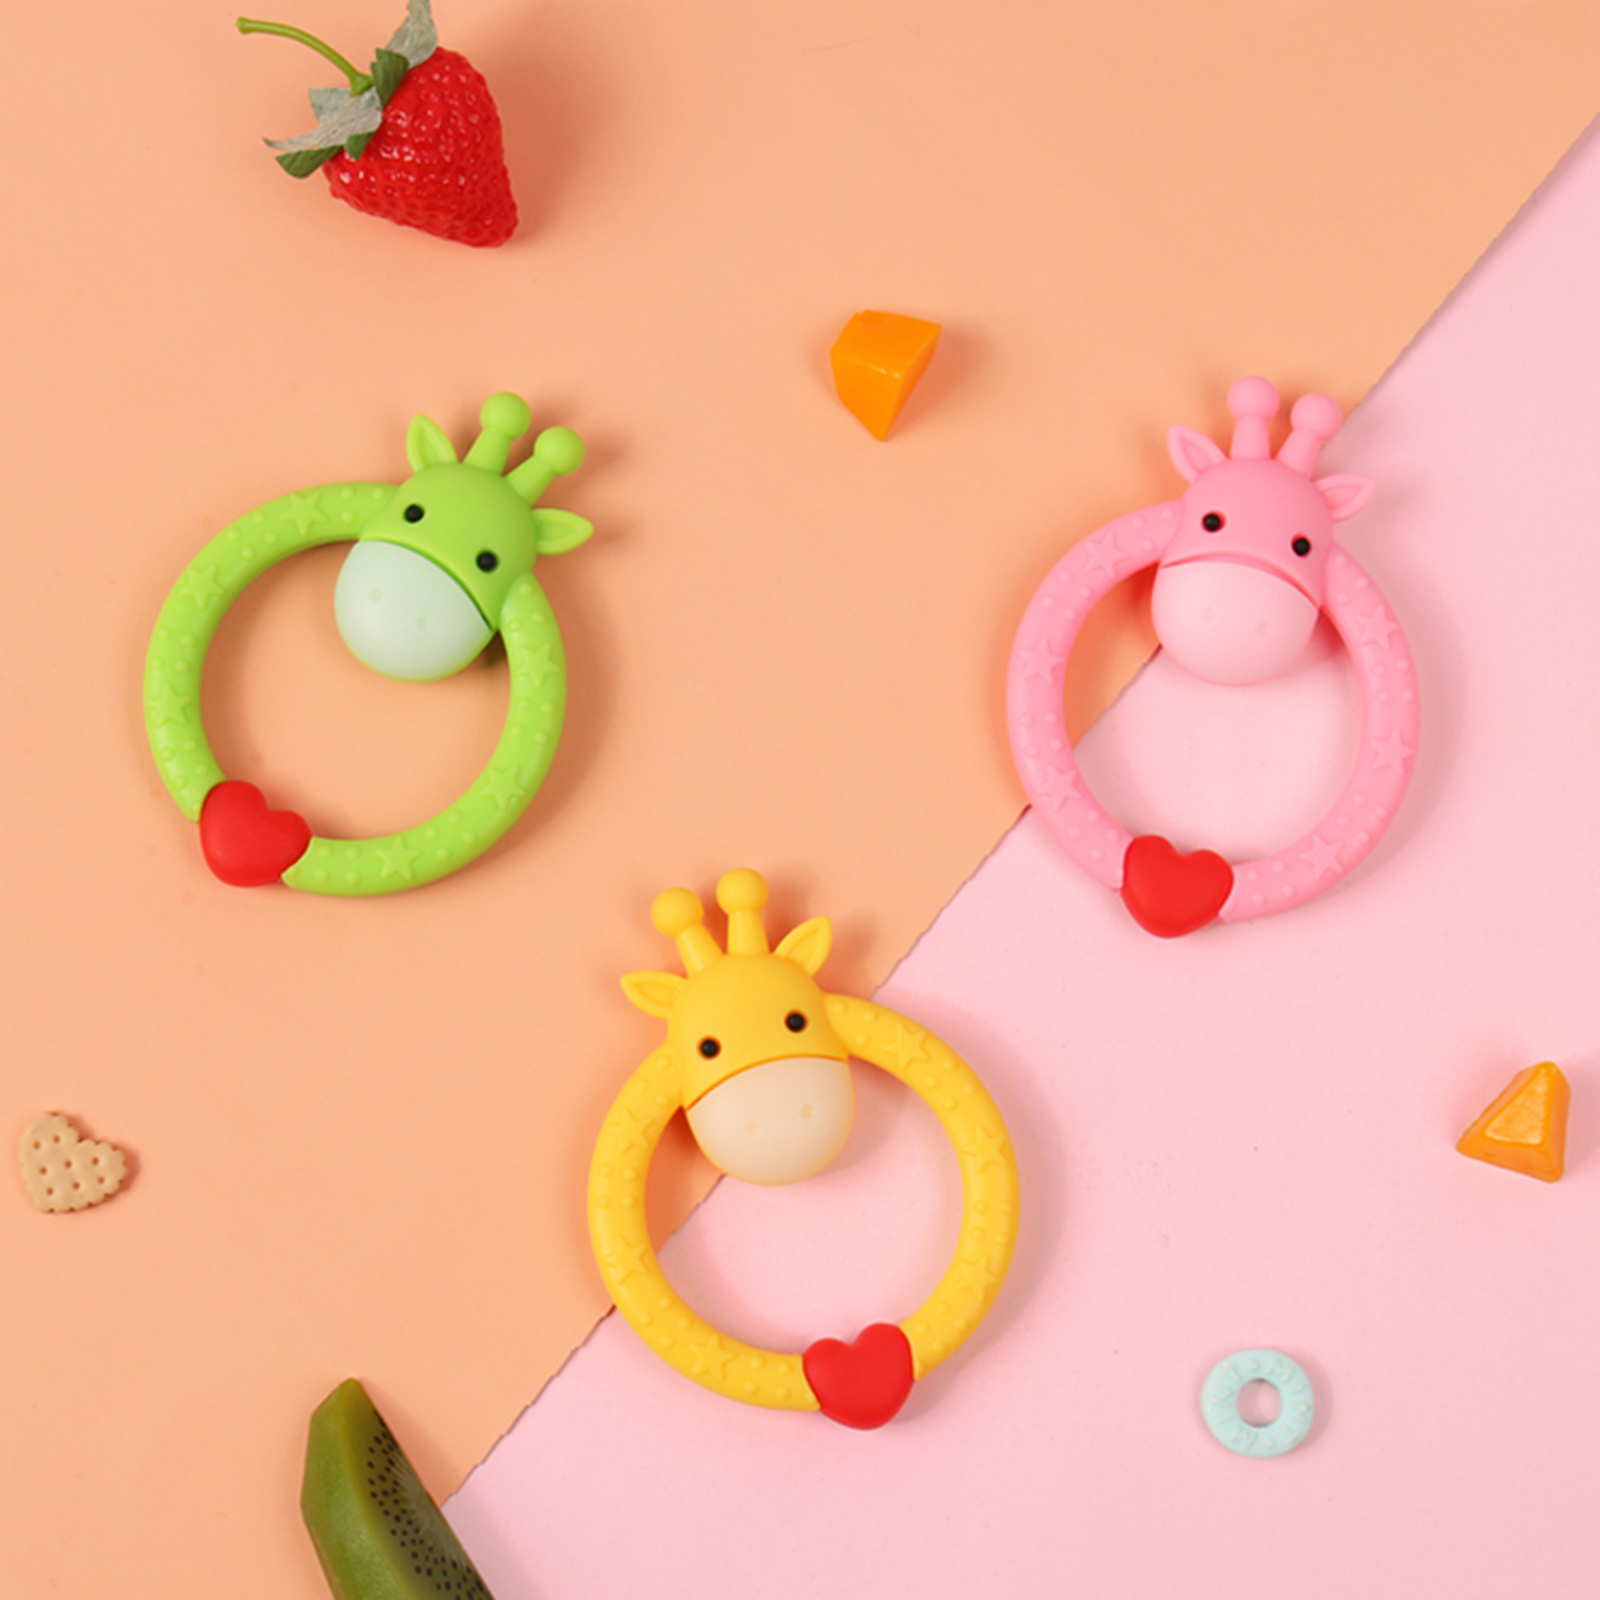 Innovative Baby Teether Ring Toy for Teething Relief 2 1